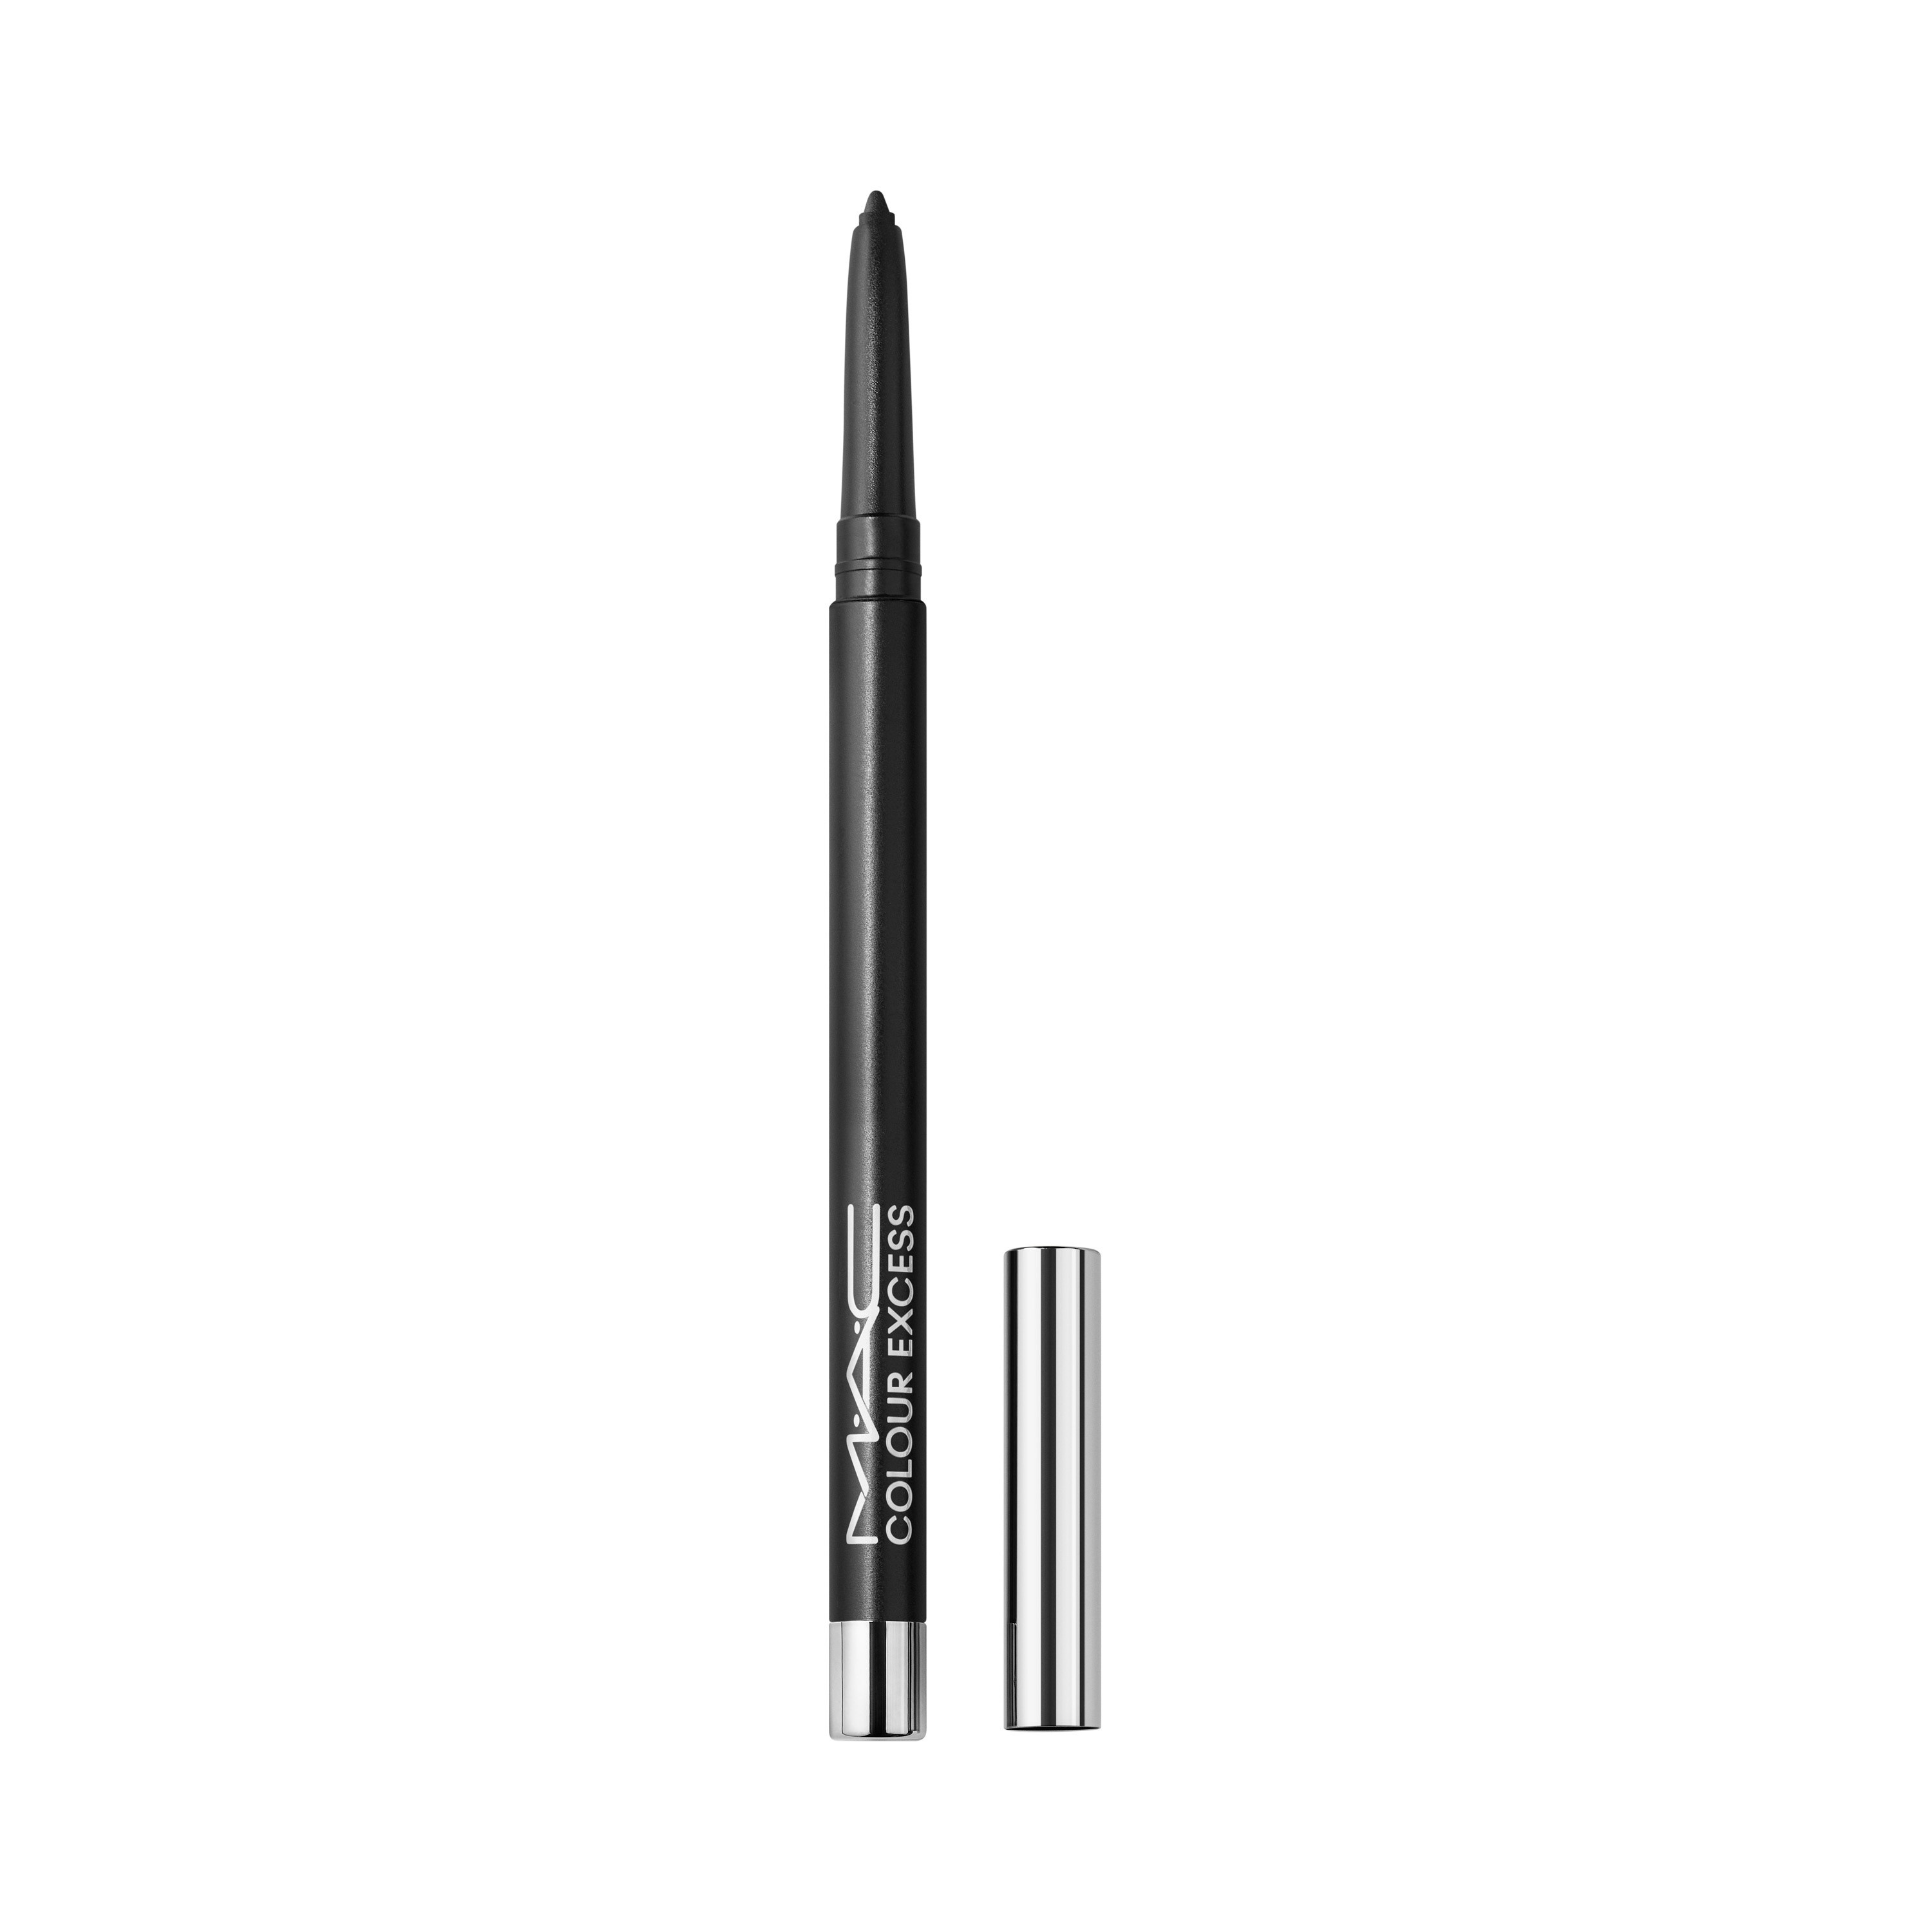 MICHELE MAGNANI SELECTION - Colour Excess Gel Liner-Glide Or Die, Nero, large image number 0